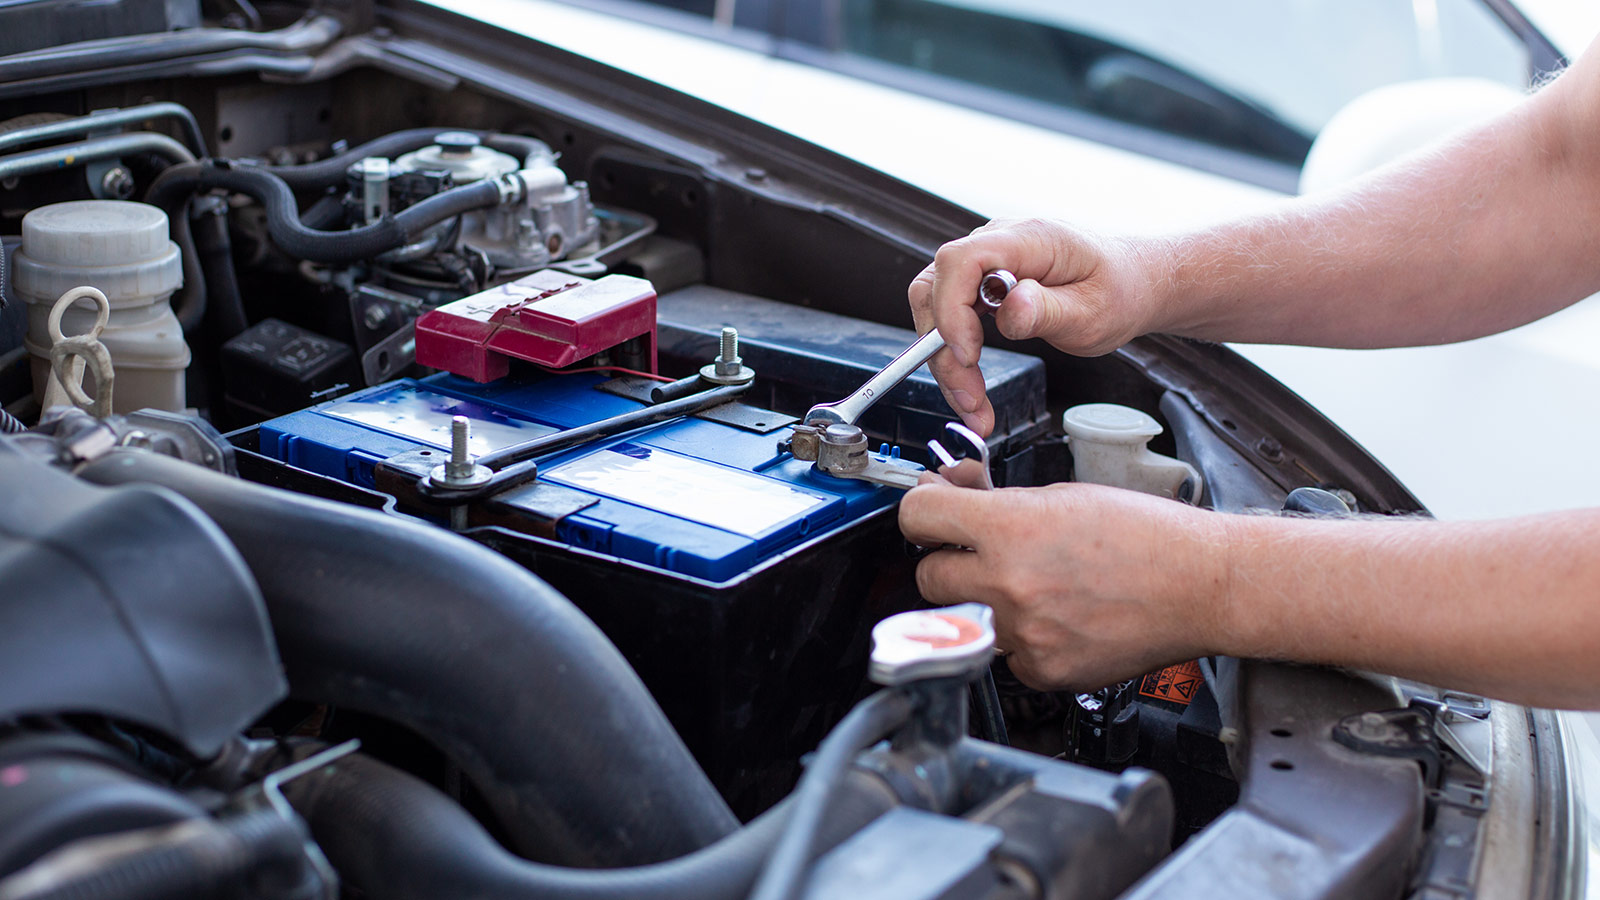 Get professional car battery replacement at Avatar Auto Care in Surrey, BC, ensuring your vehicle's power and reliability.